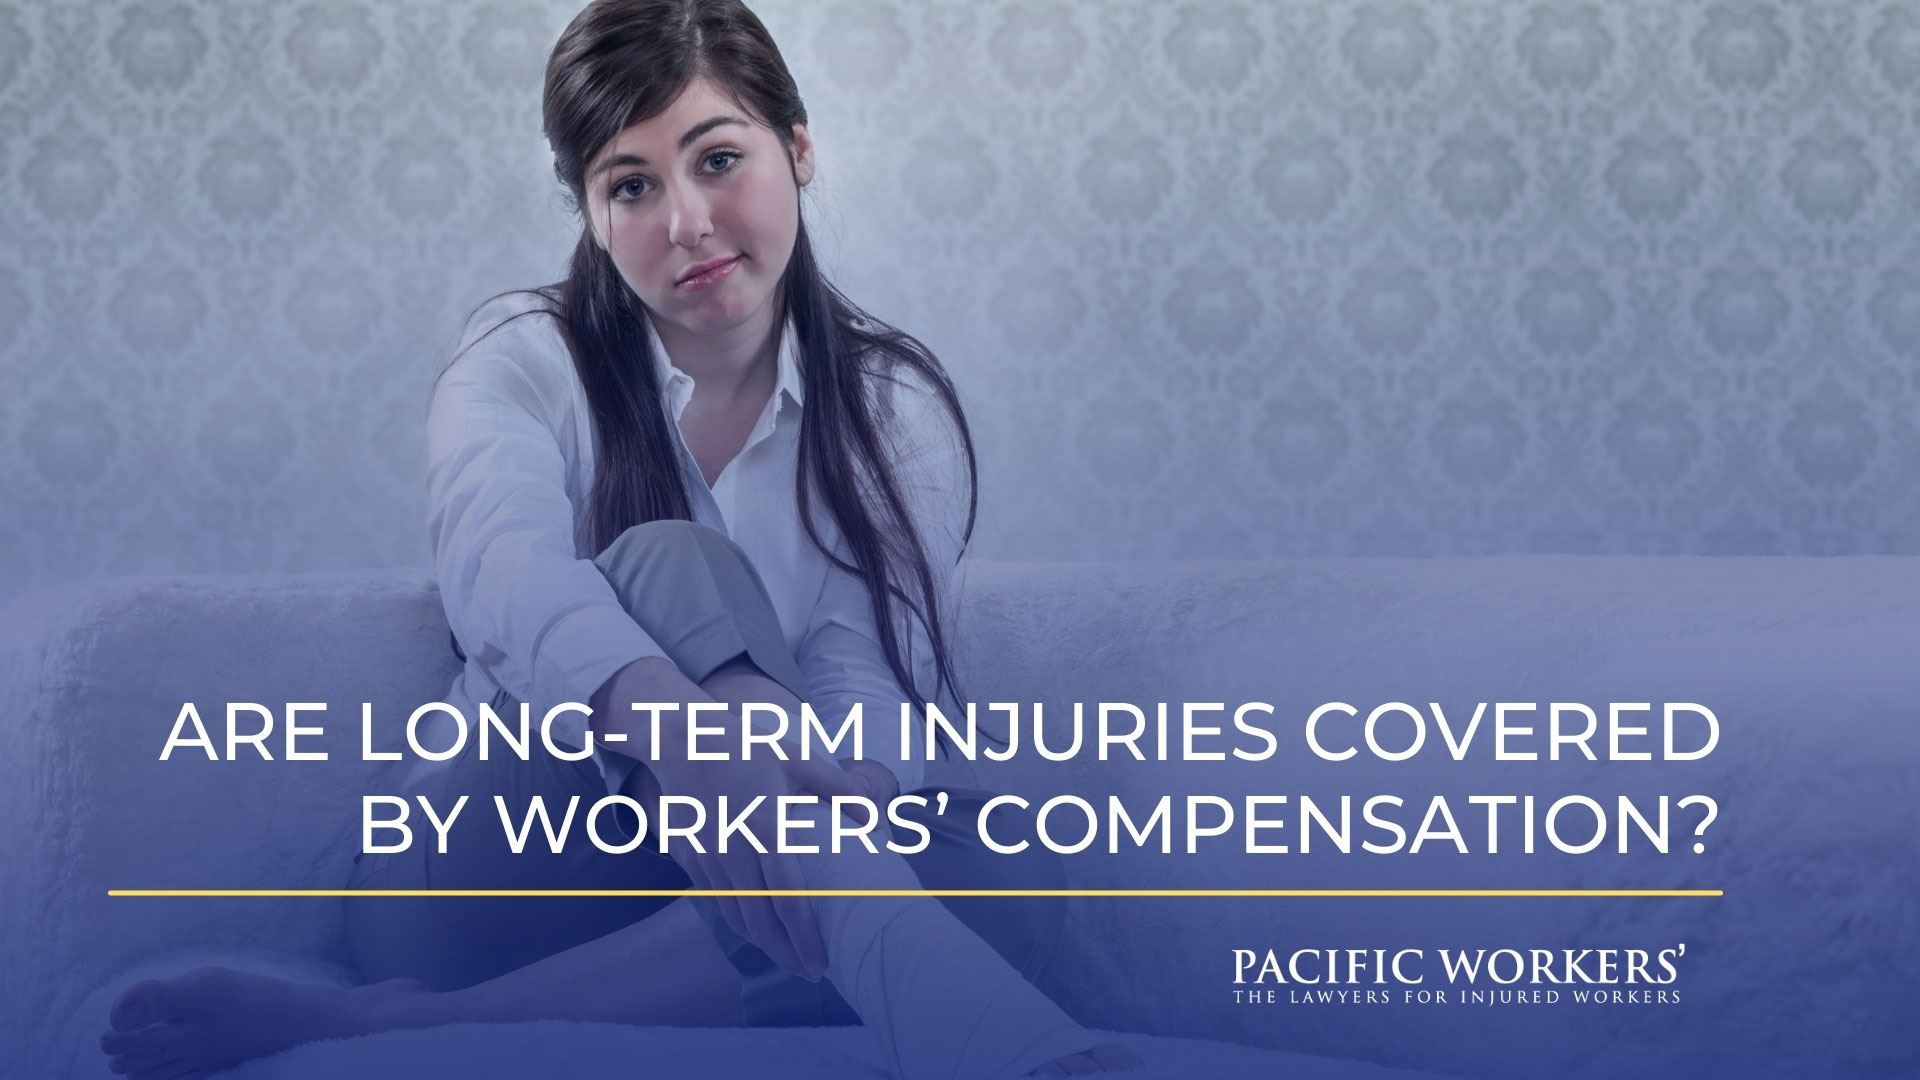 Are Long-Term Injuries Covered by Workers’ Compensation?